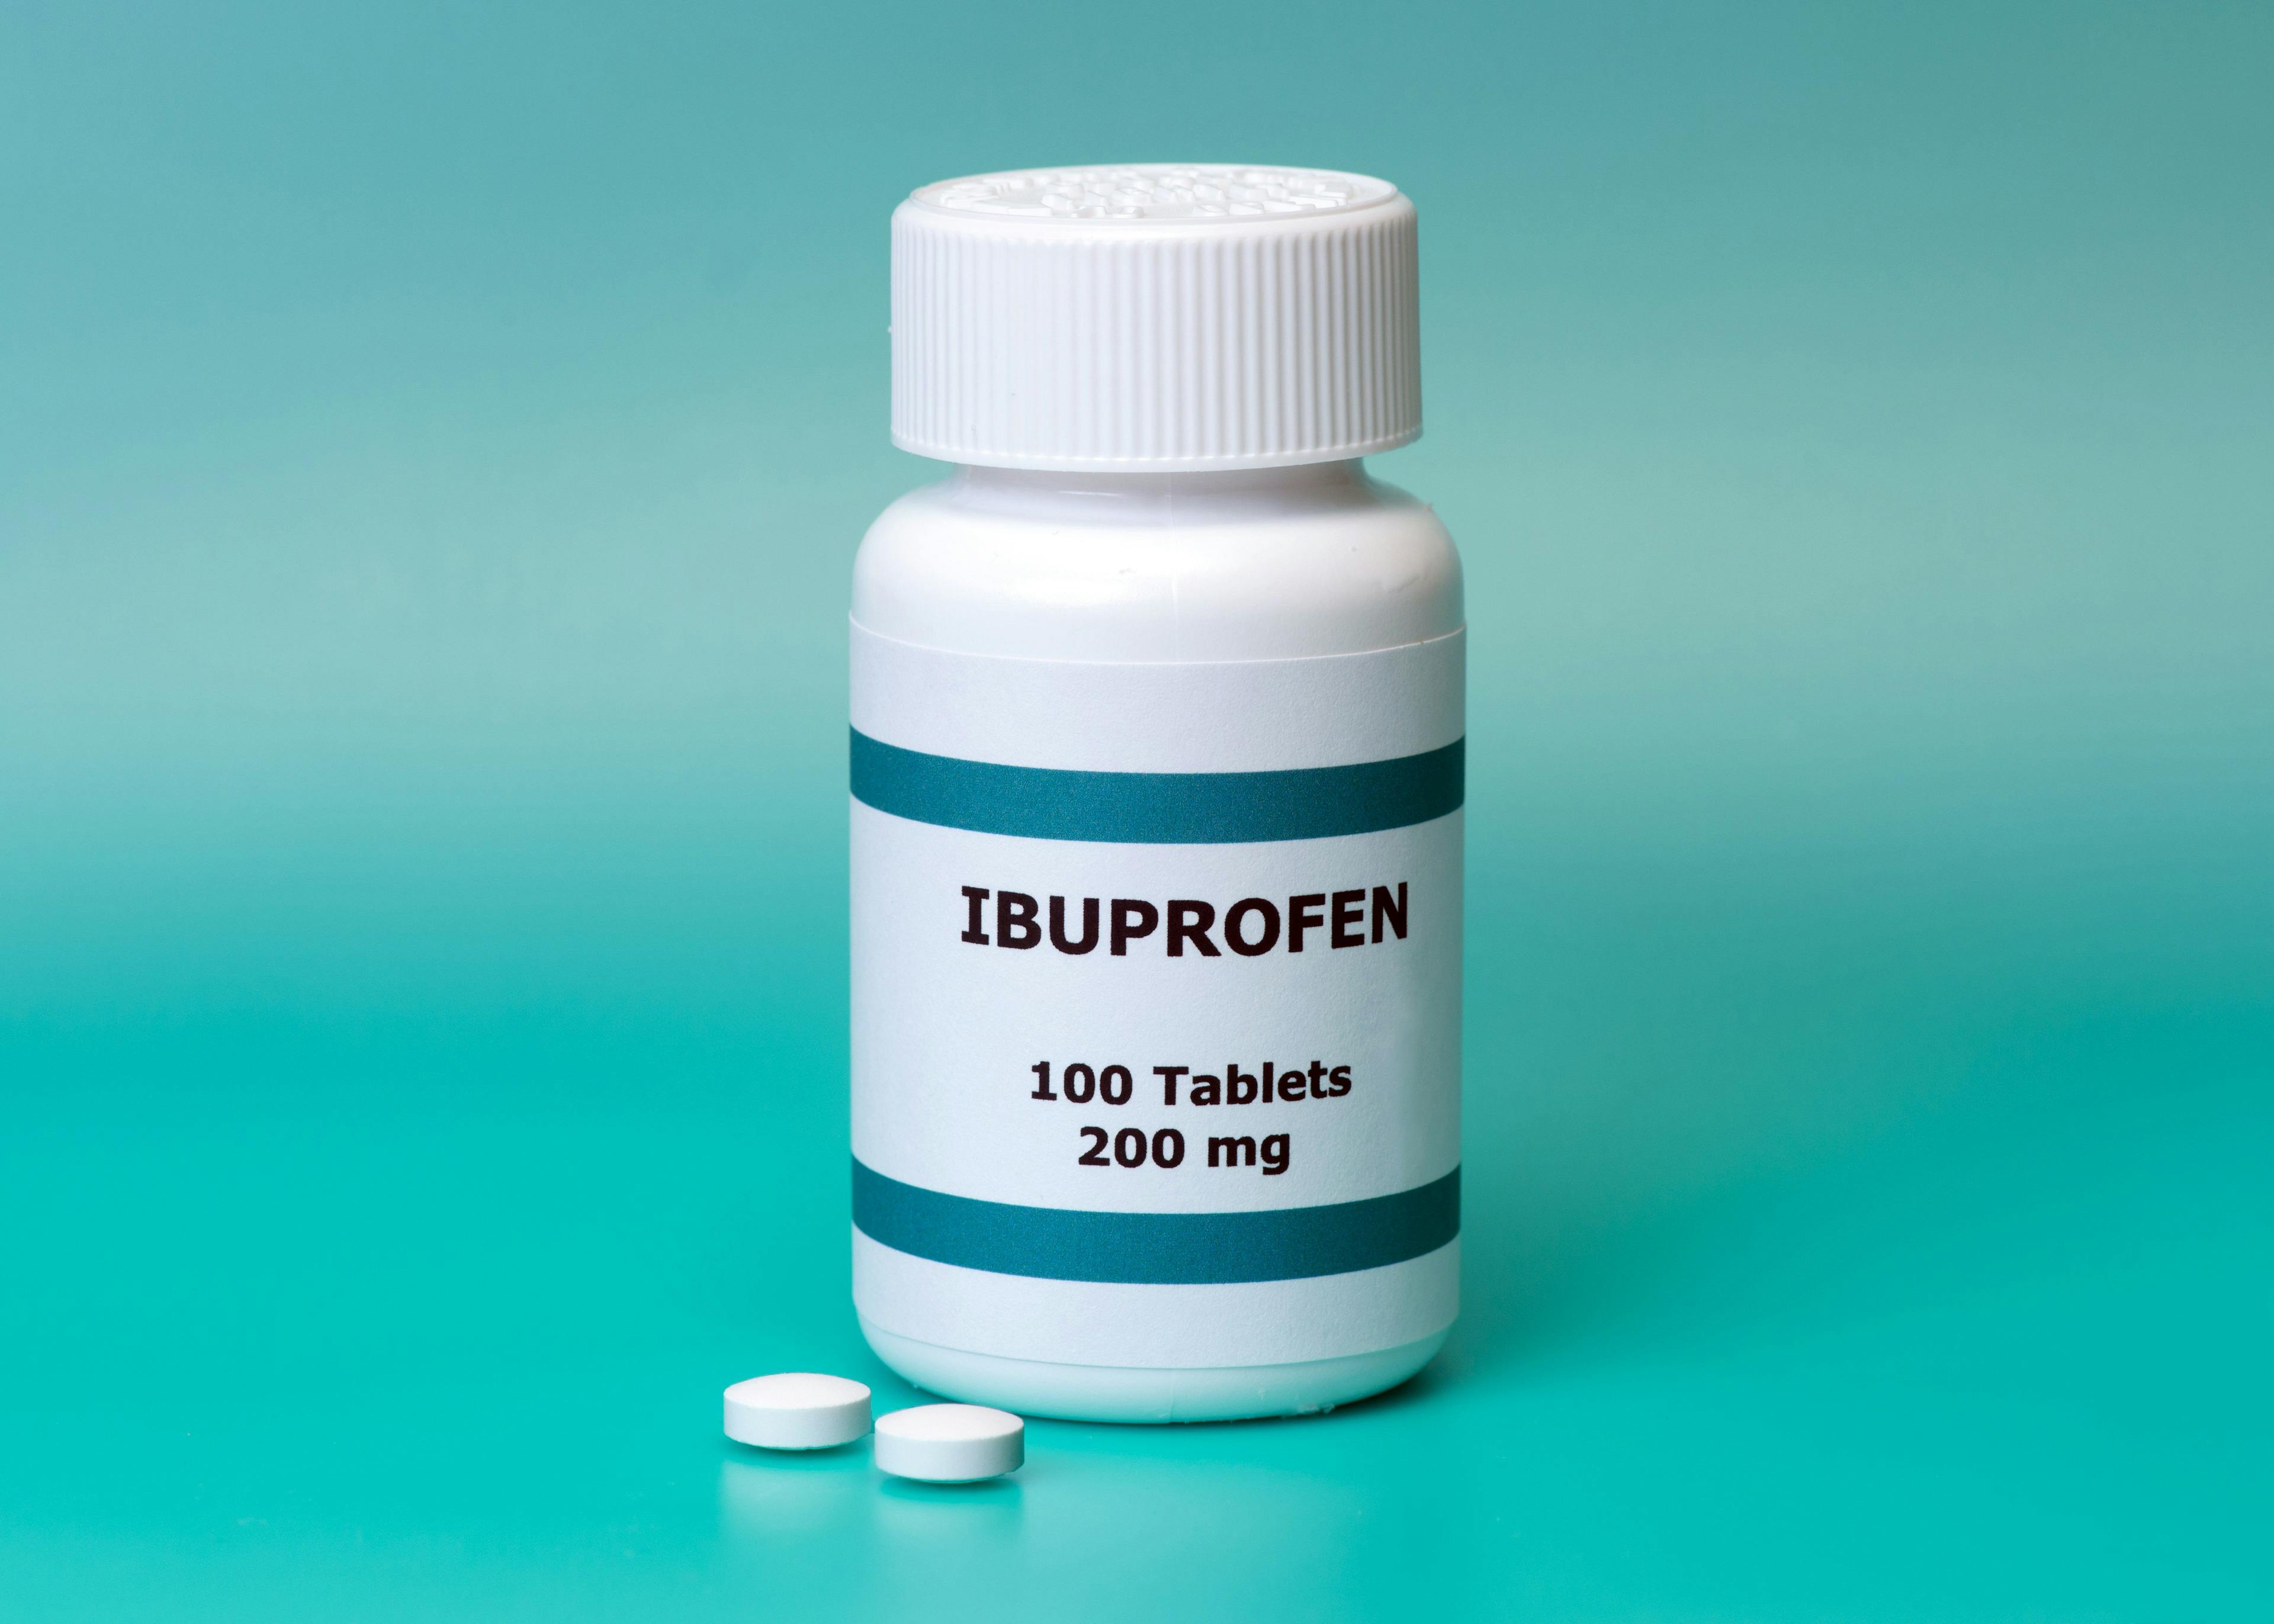 Is the Final Word on Ibuprofen and COVID-19 Risk?